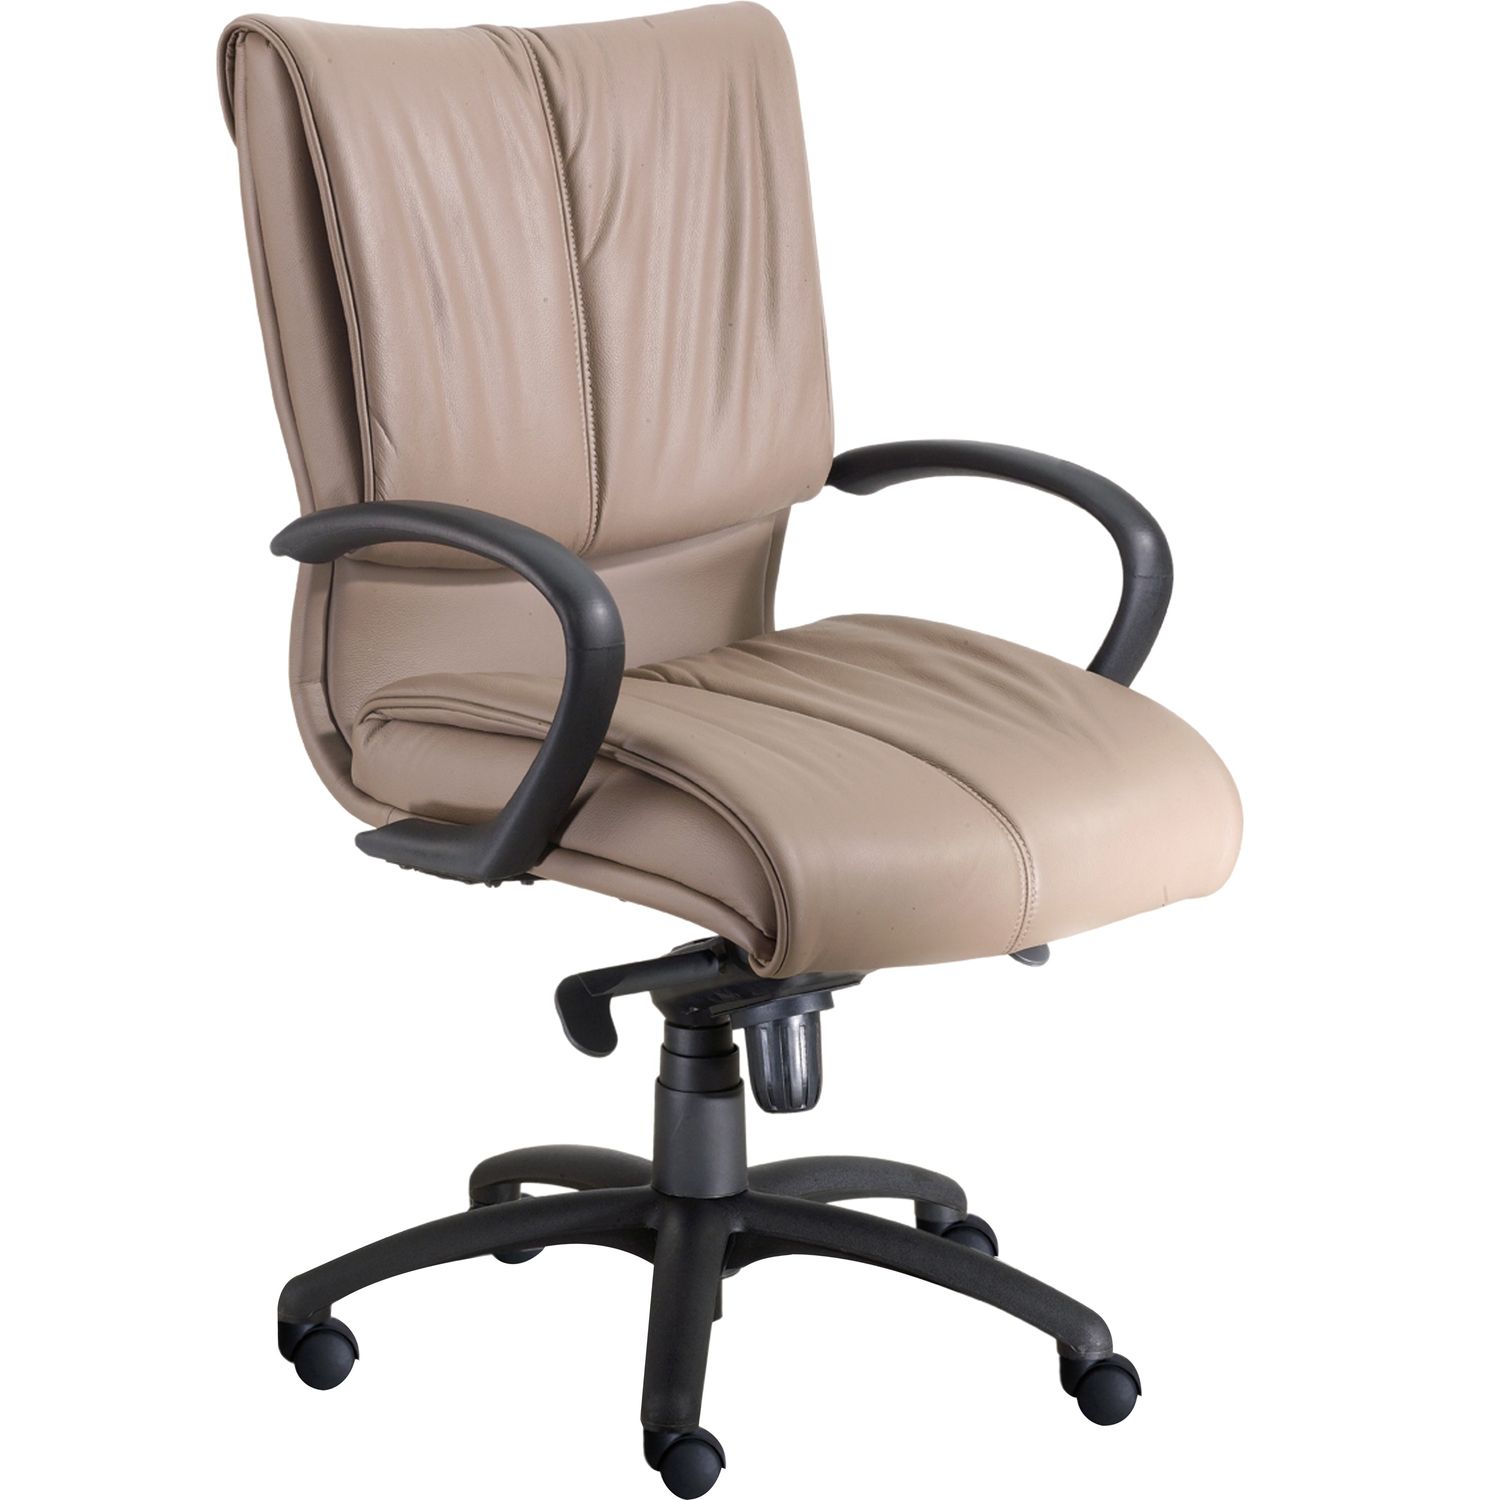 Mid-Back Executive & Conference Seating White Top Grain Leather Seat, White Top Grain Leather Back, Mid Back, 5-star Base, 1 Each